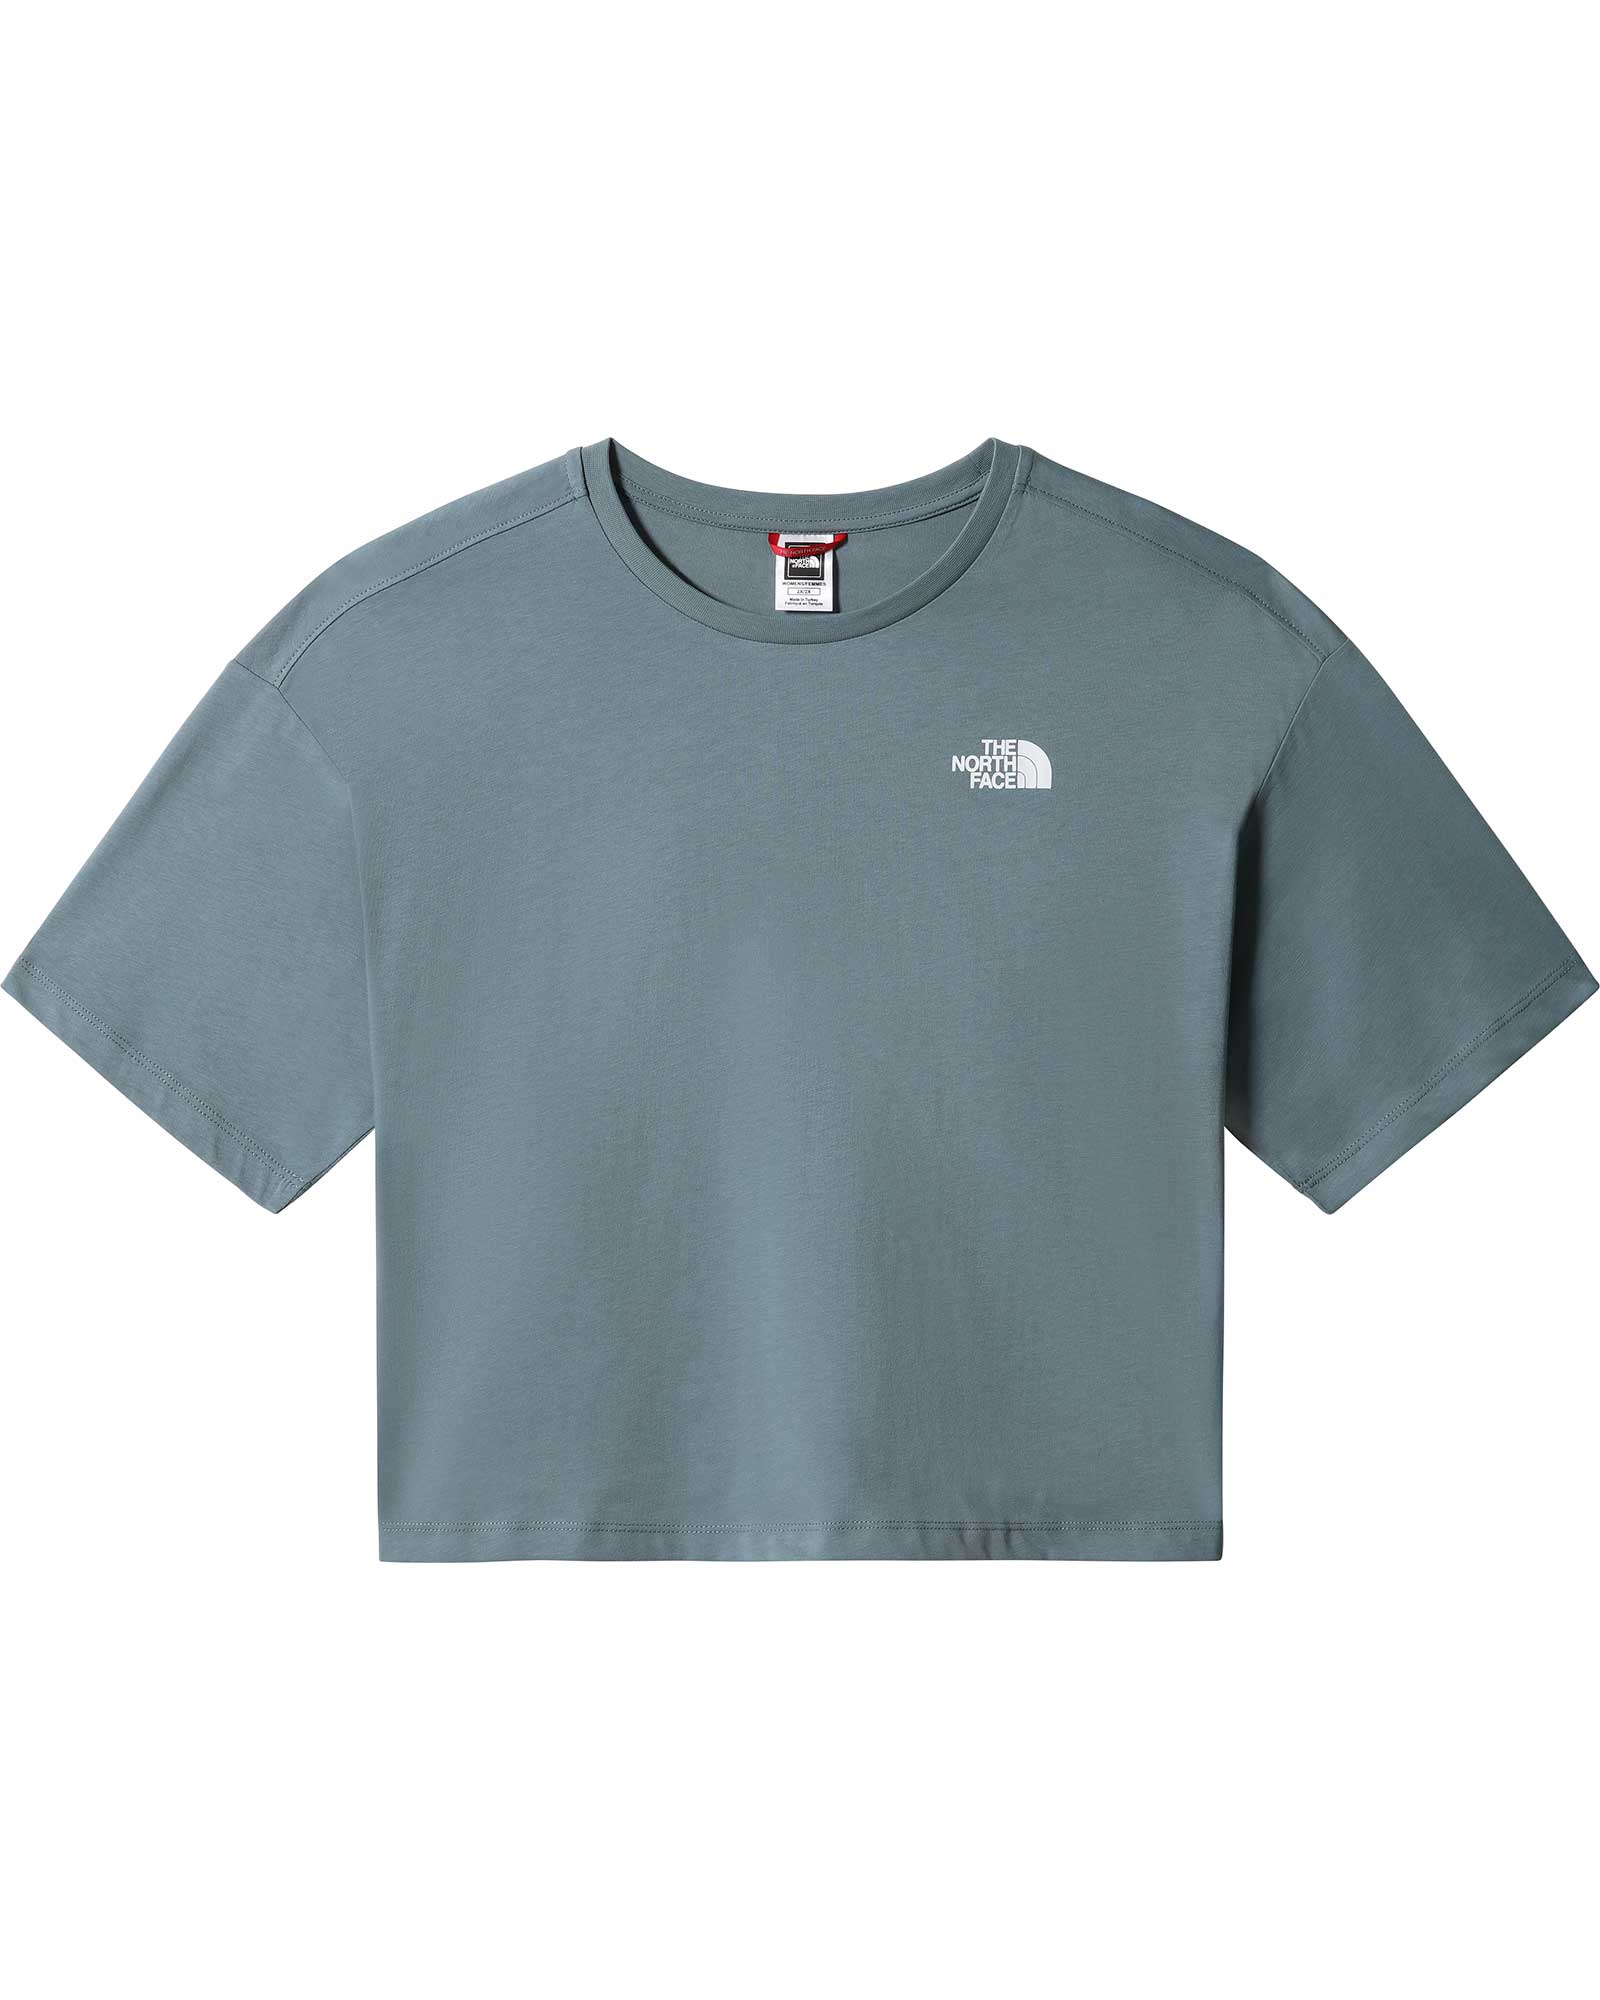 The North Face Plus Cropped Simple Dome Women’s T Shirt - Goblin Blue 3X